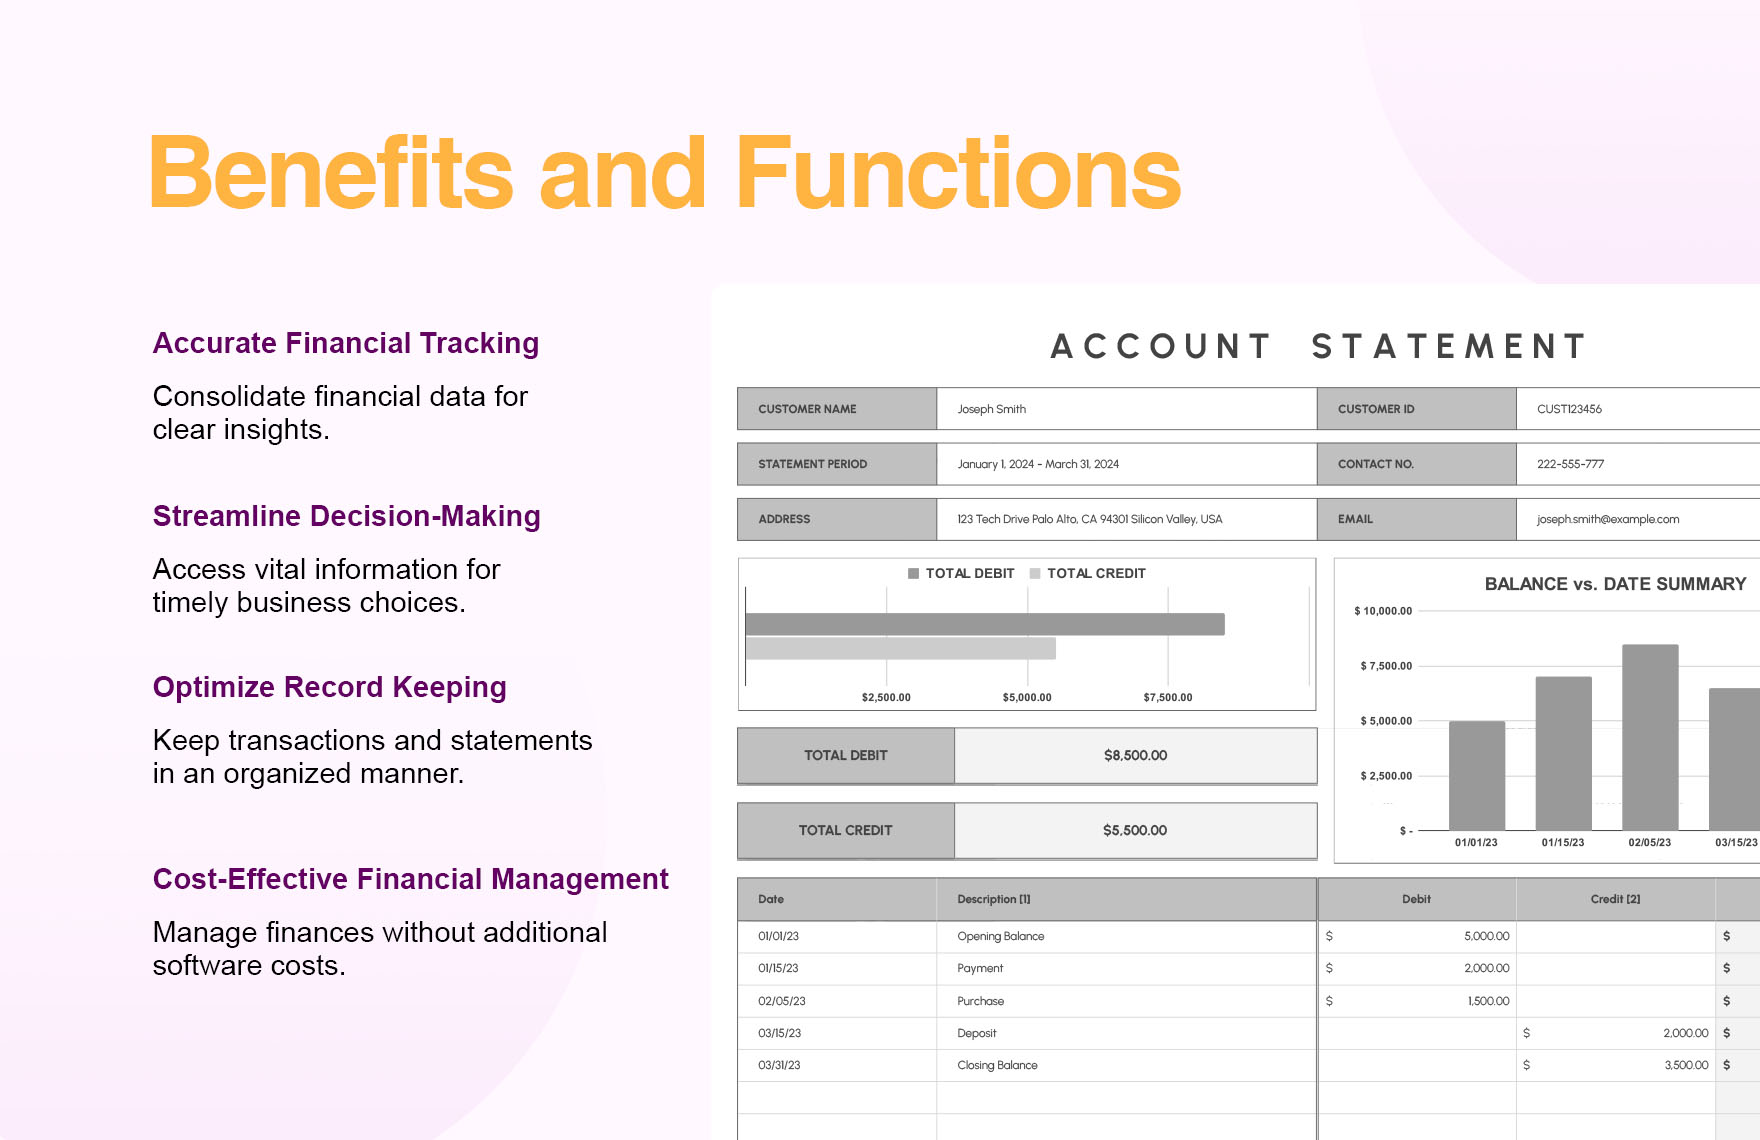 Account Statement Template